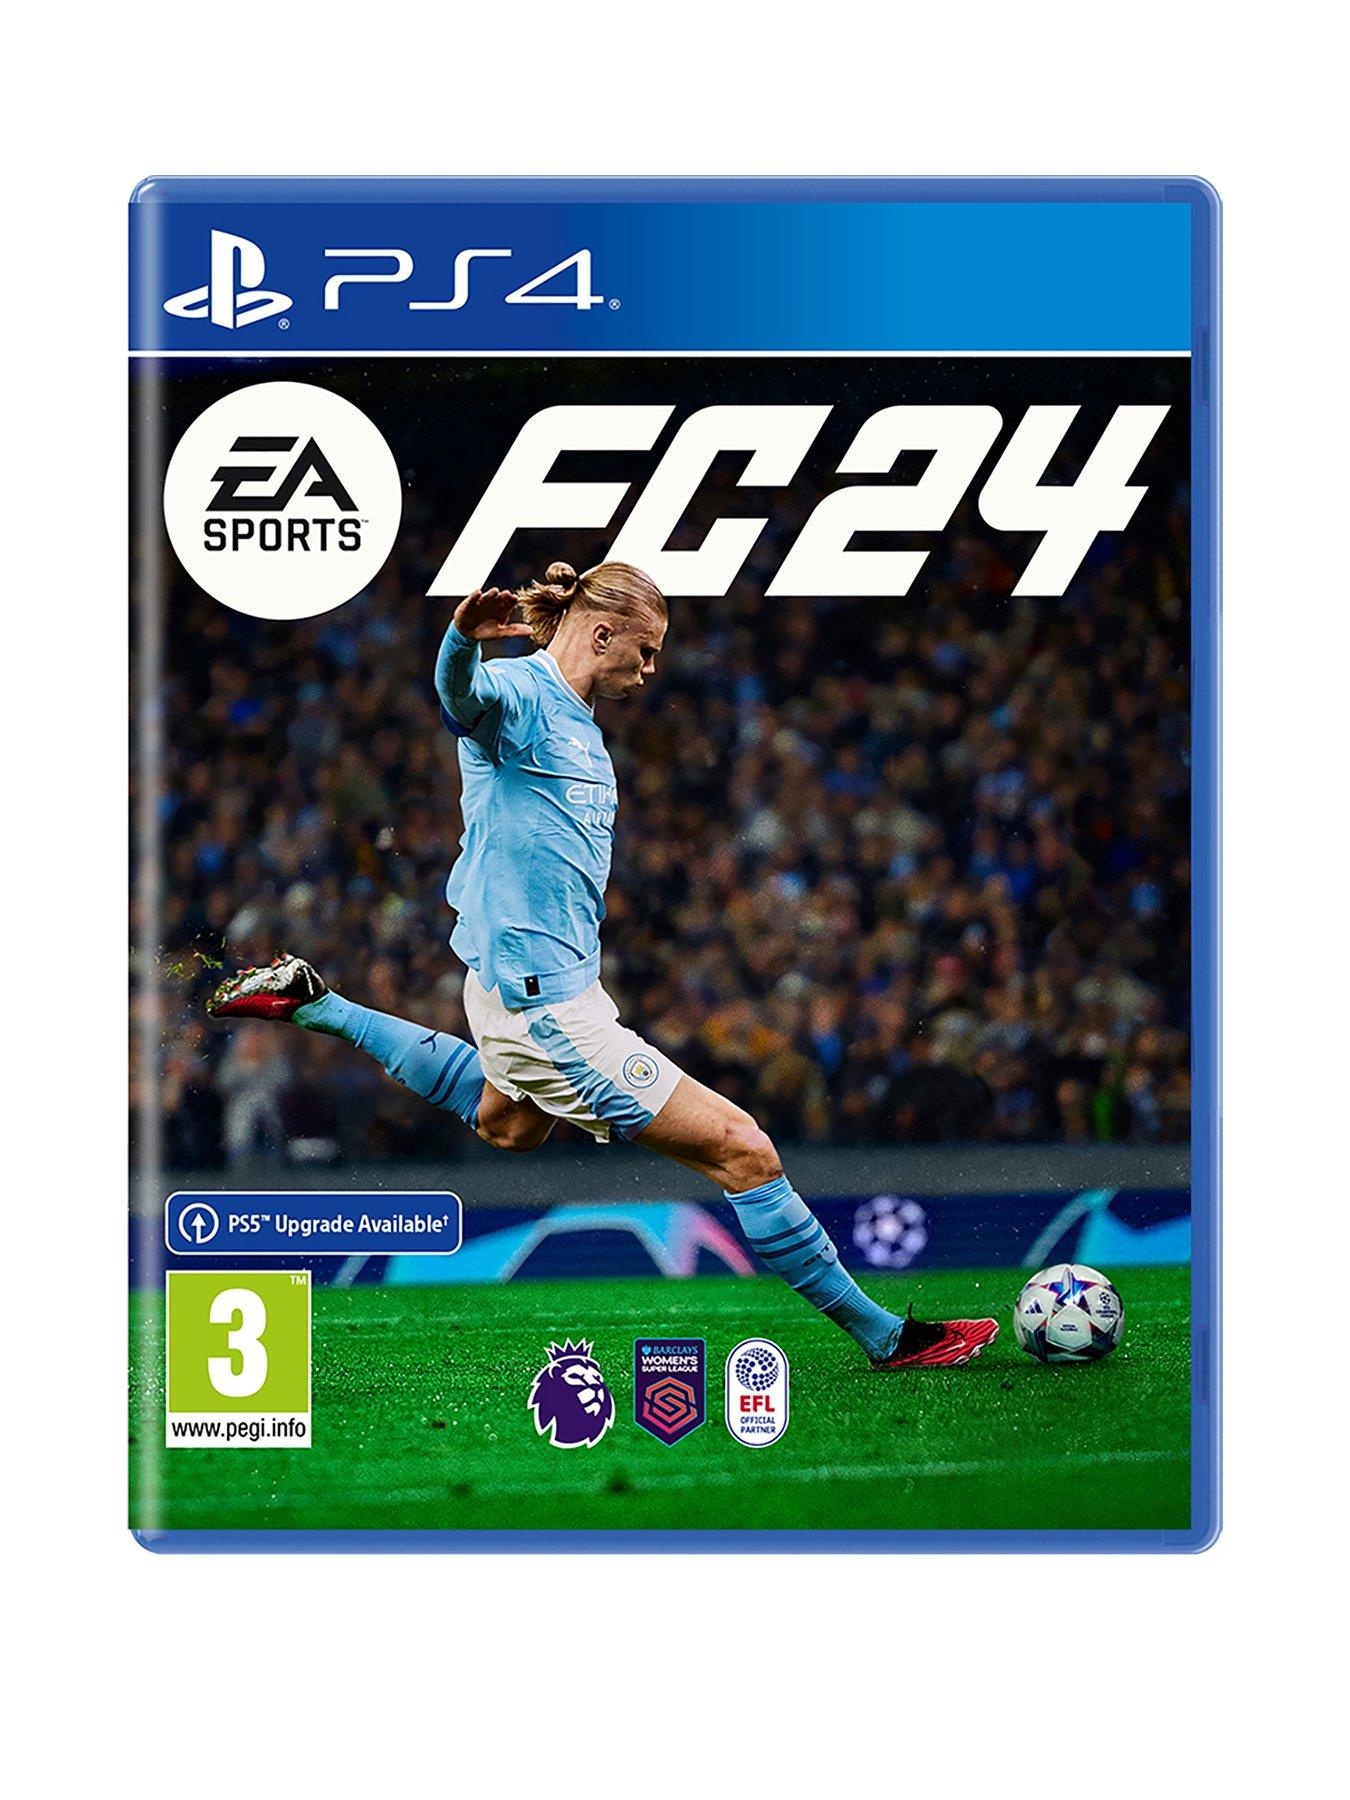 Brand New PS5 Games/FIFA 23/NBA 2k23/Madden 23/F1 2021 ~ Fast Free Shipping!